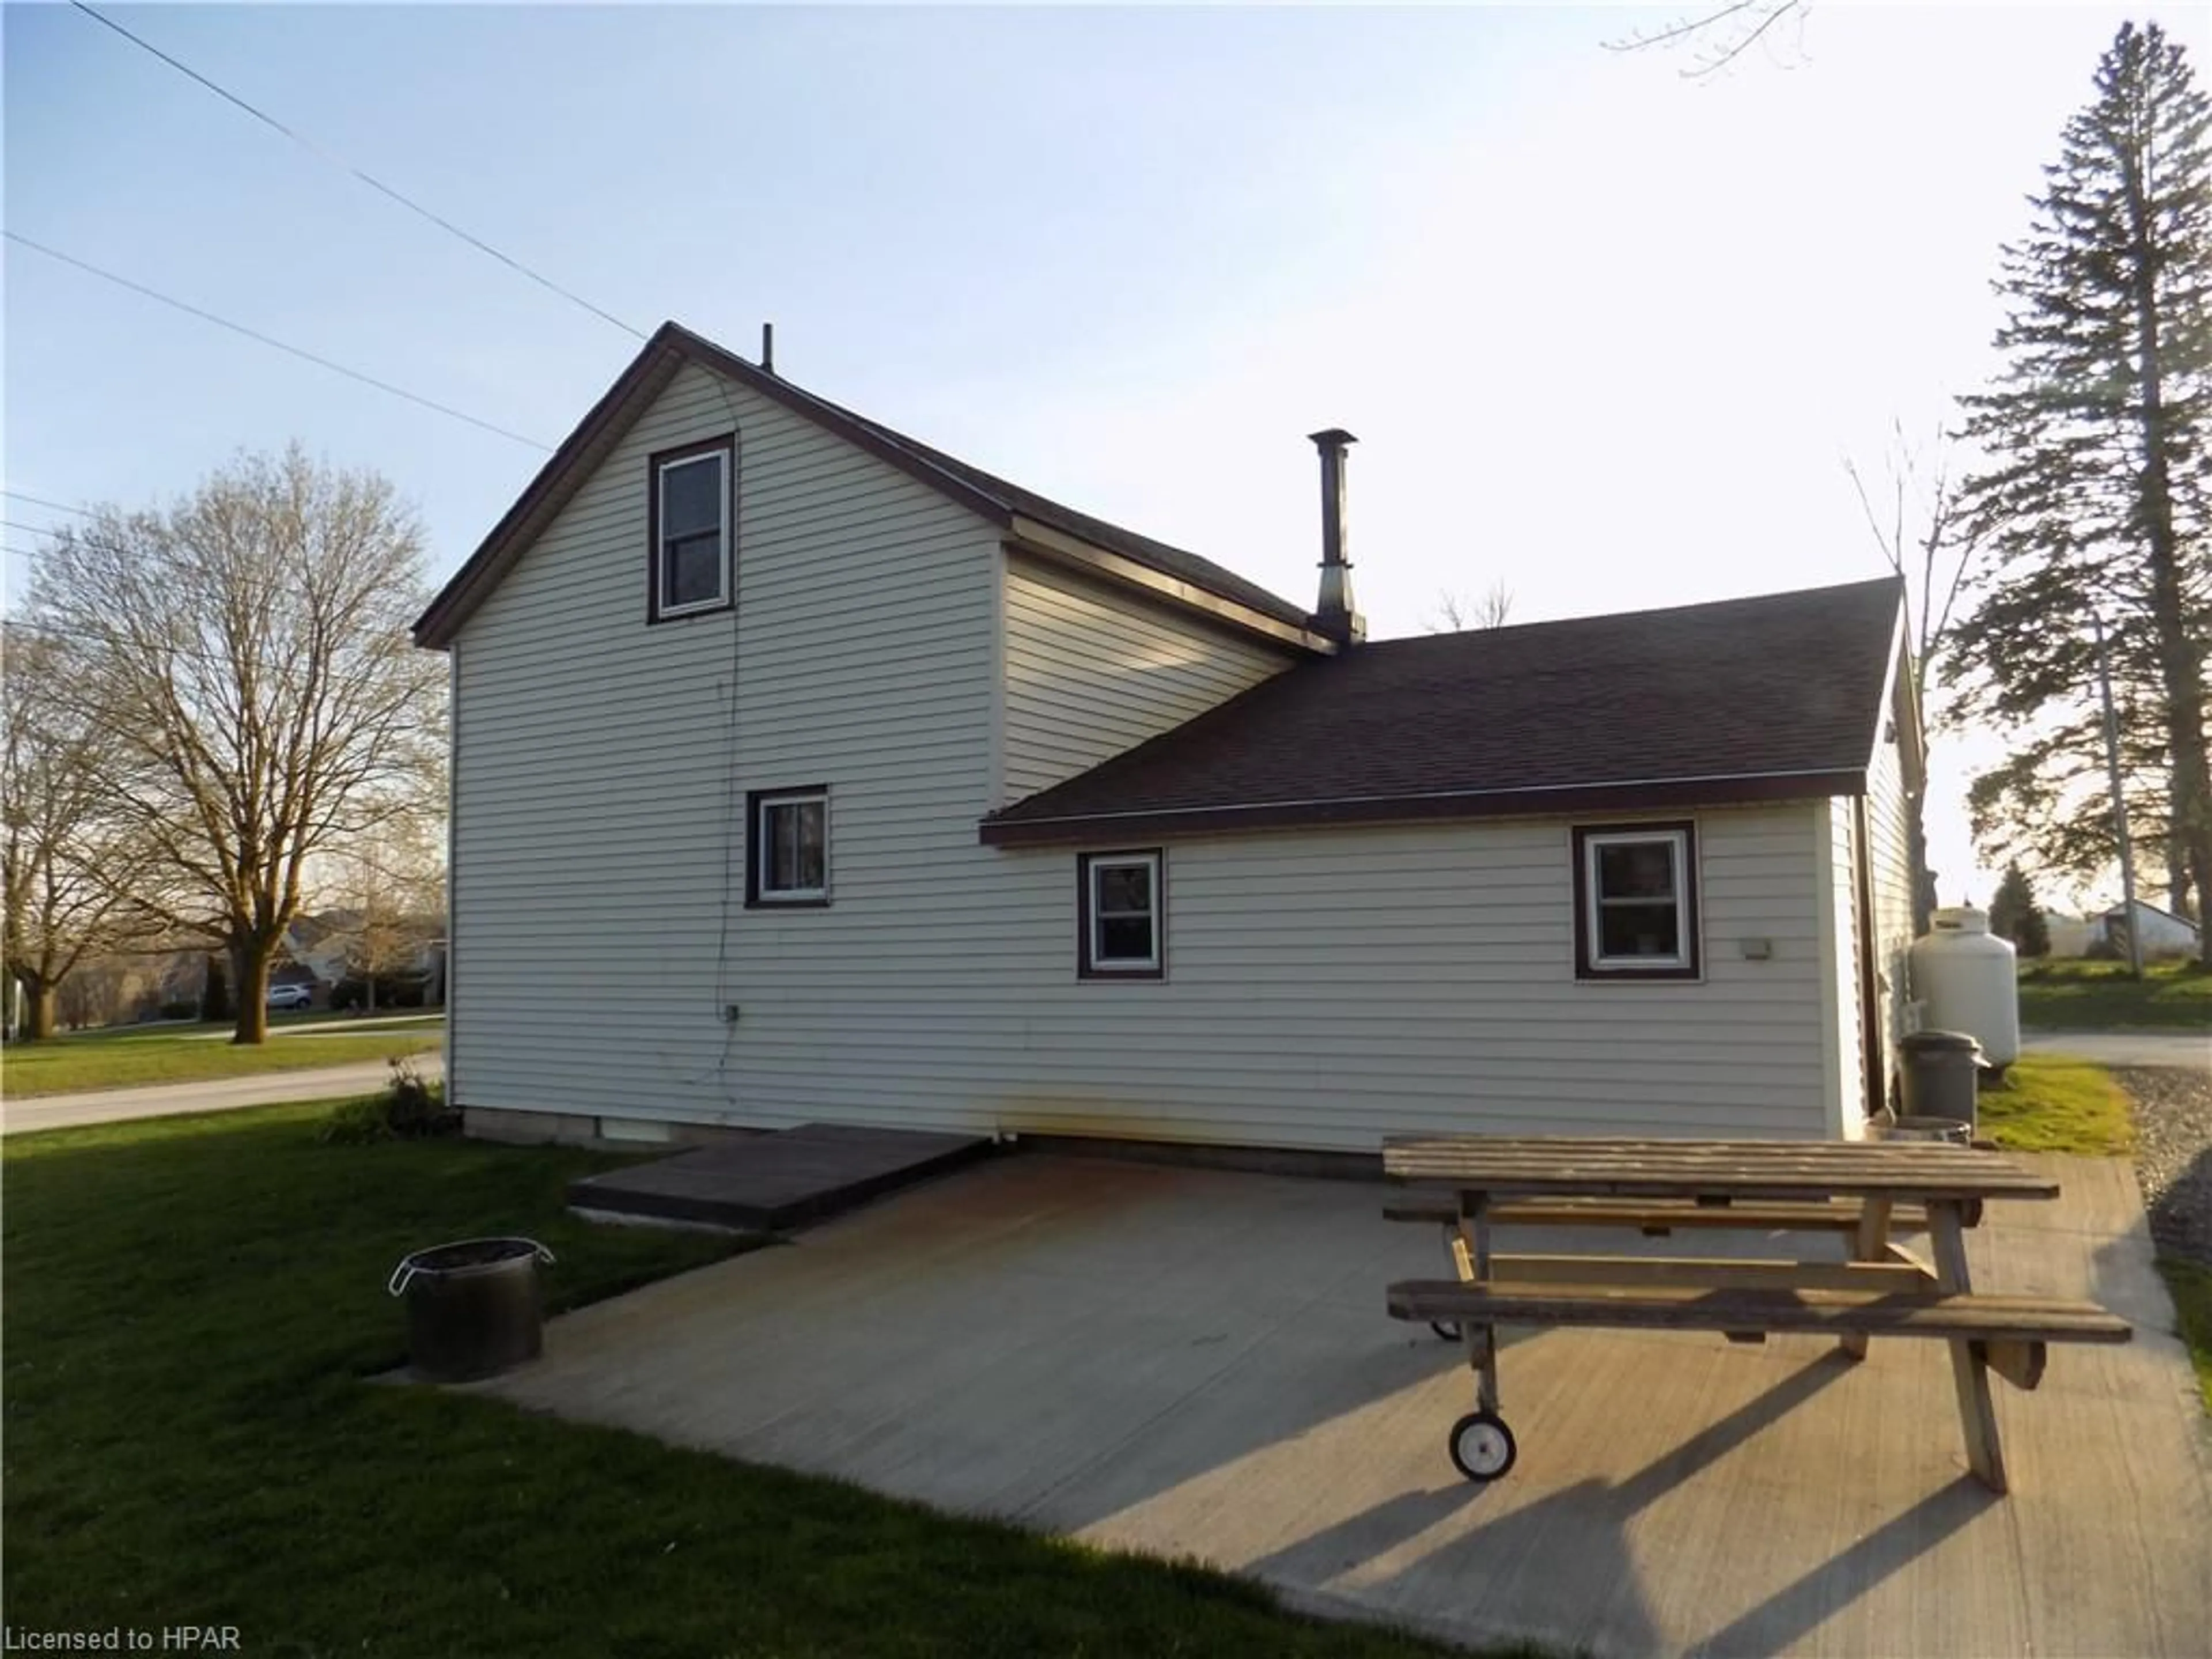 Frontside or backside of a home for 2021 William St St, Gorrie Ontario N0G 1X0